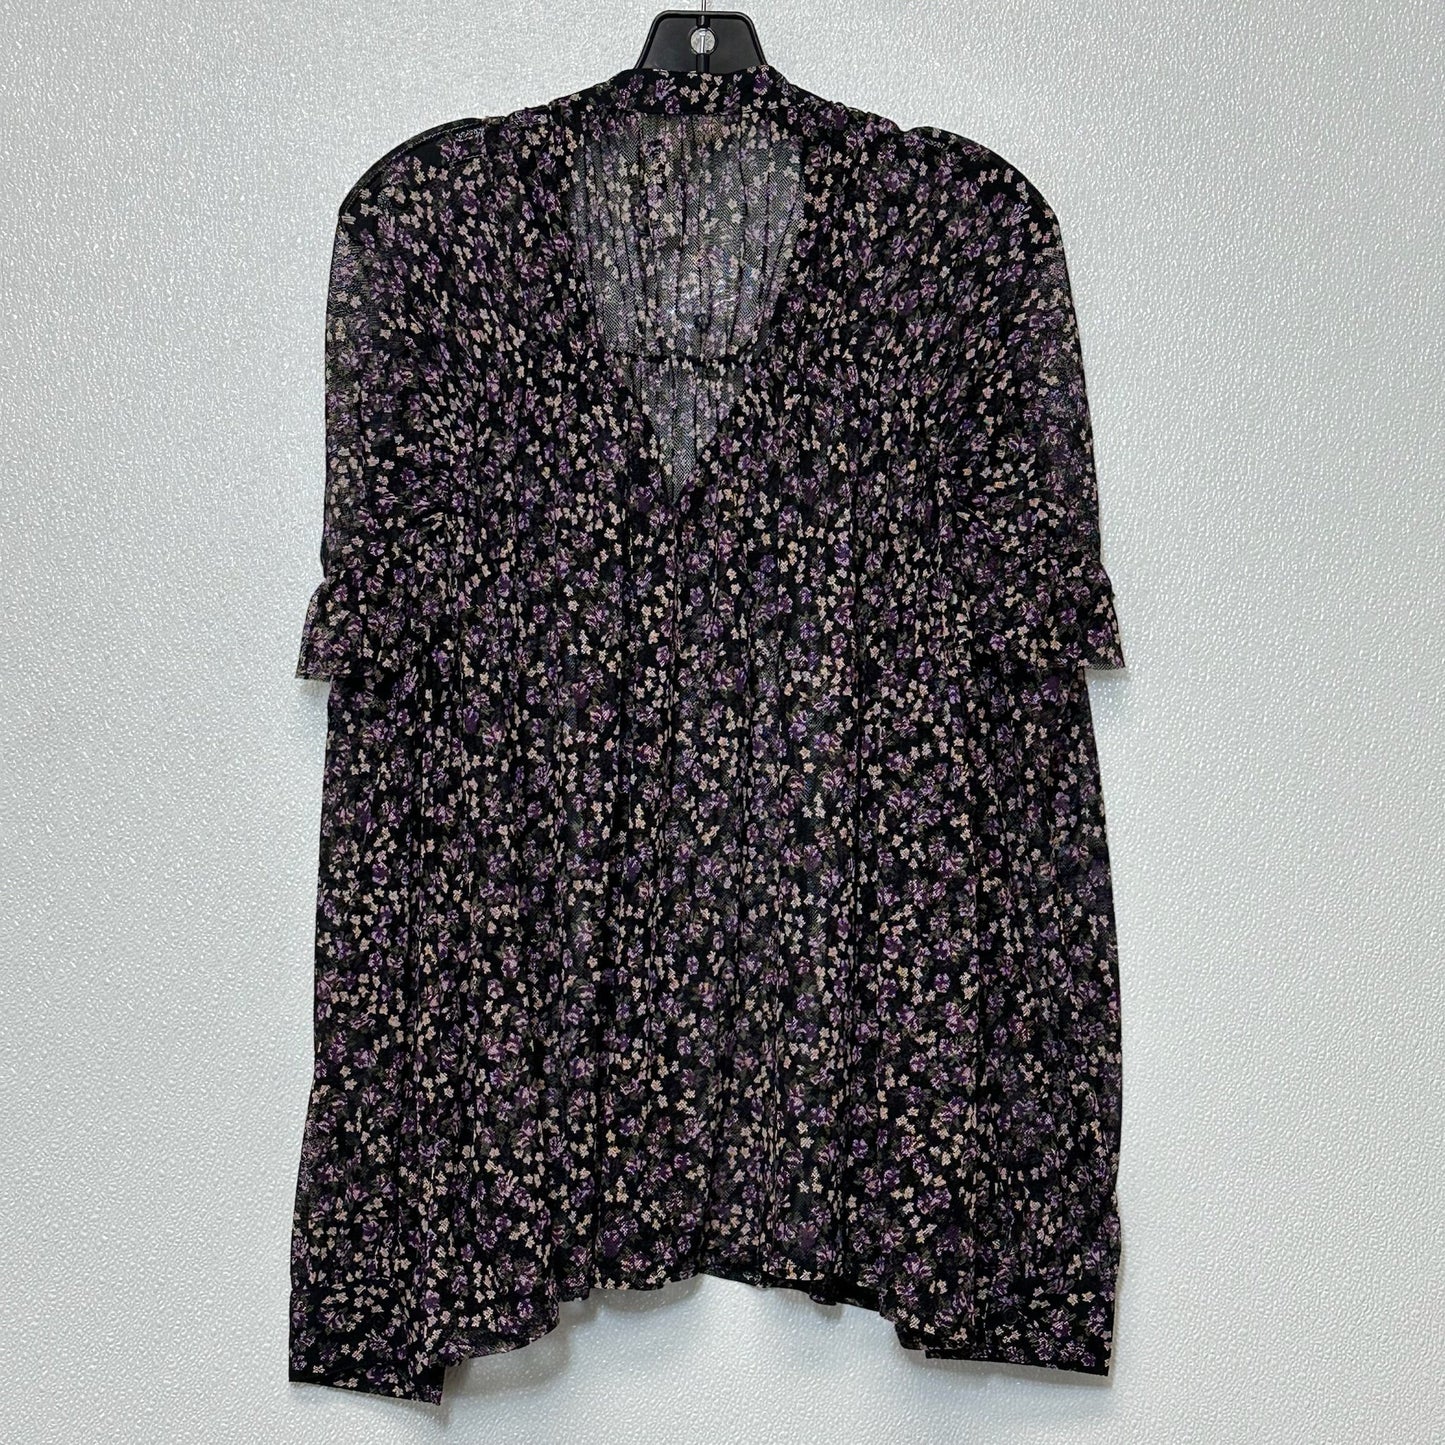 Top long Sleeve By Clothes Mentor  Size: M